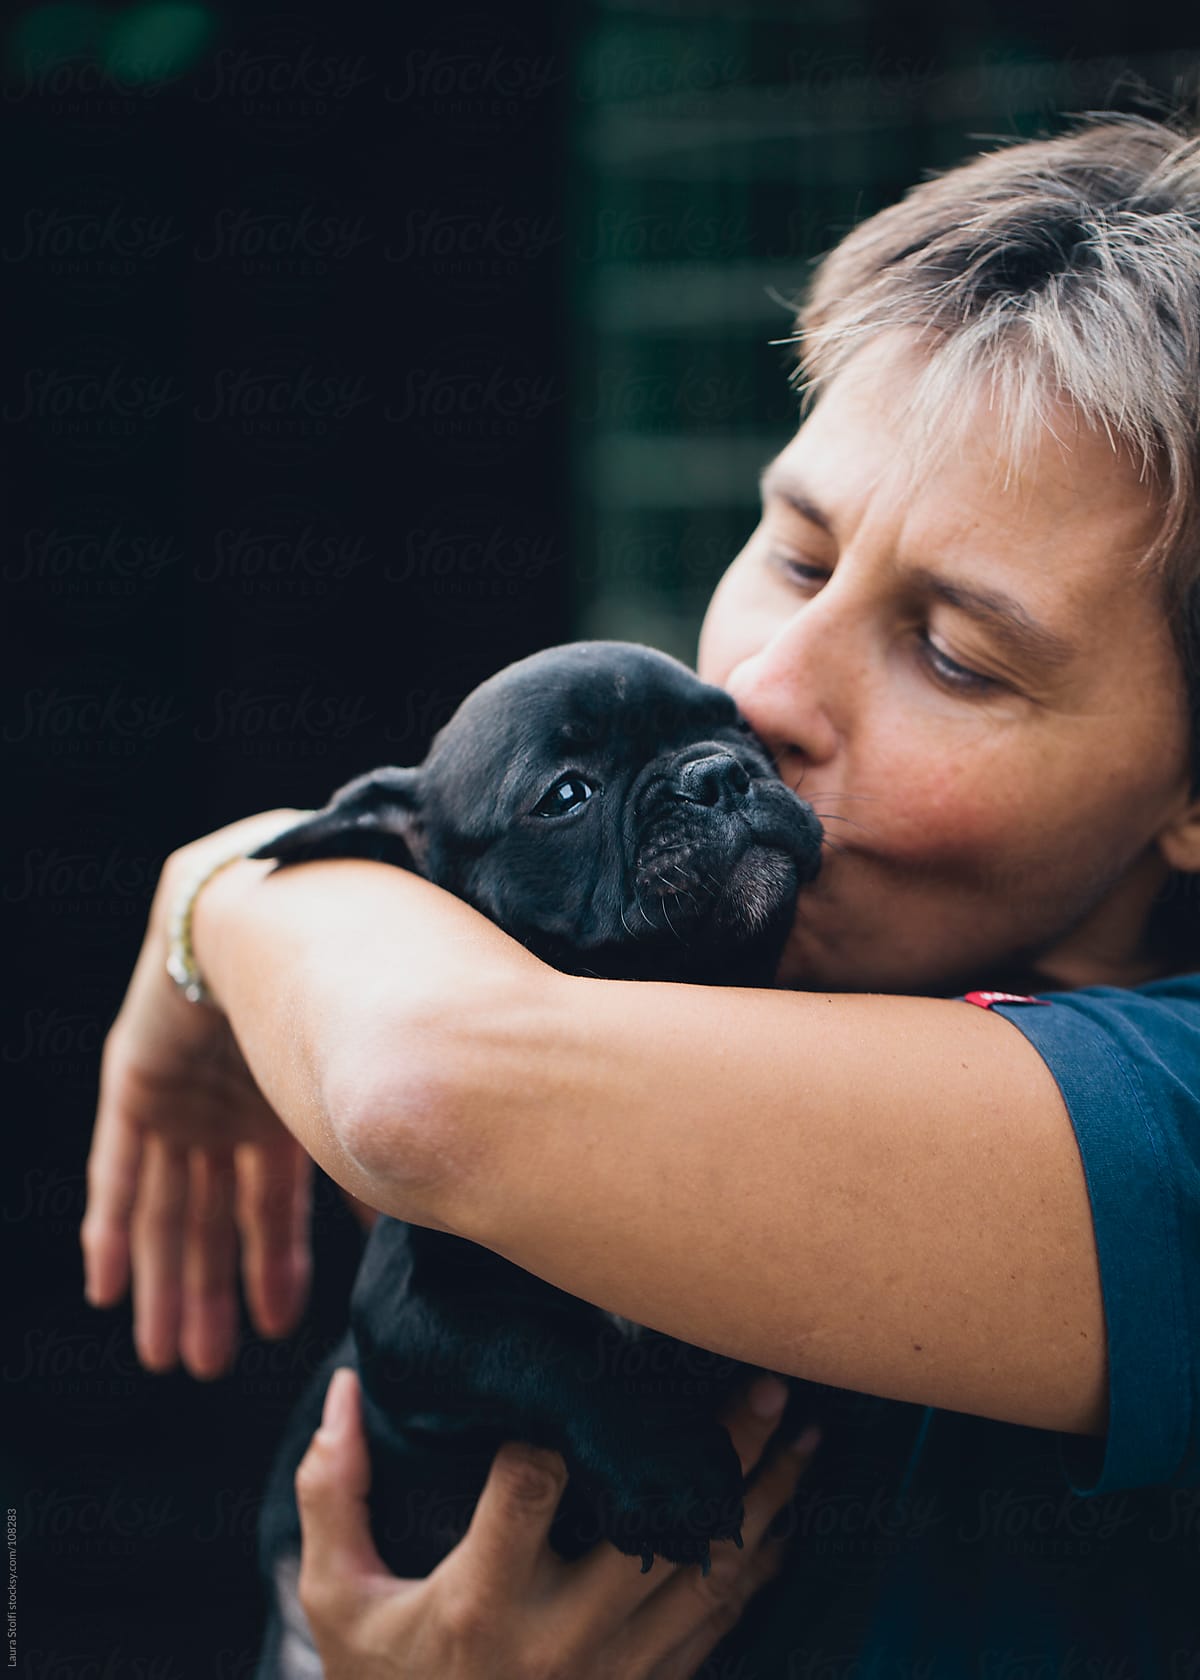 Woman holding in her arms and cuddling a French Bulldog puppy dog